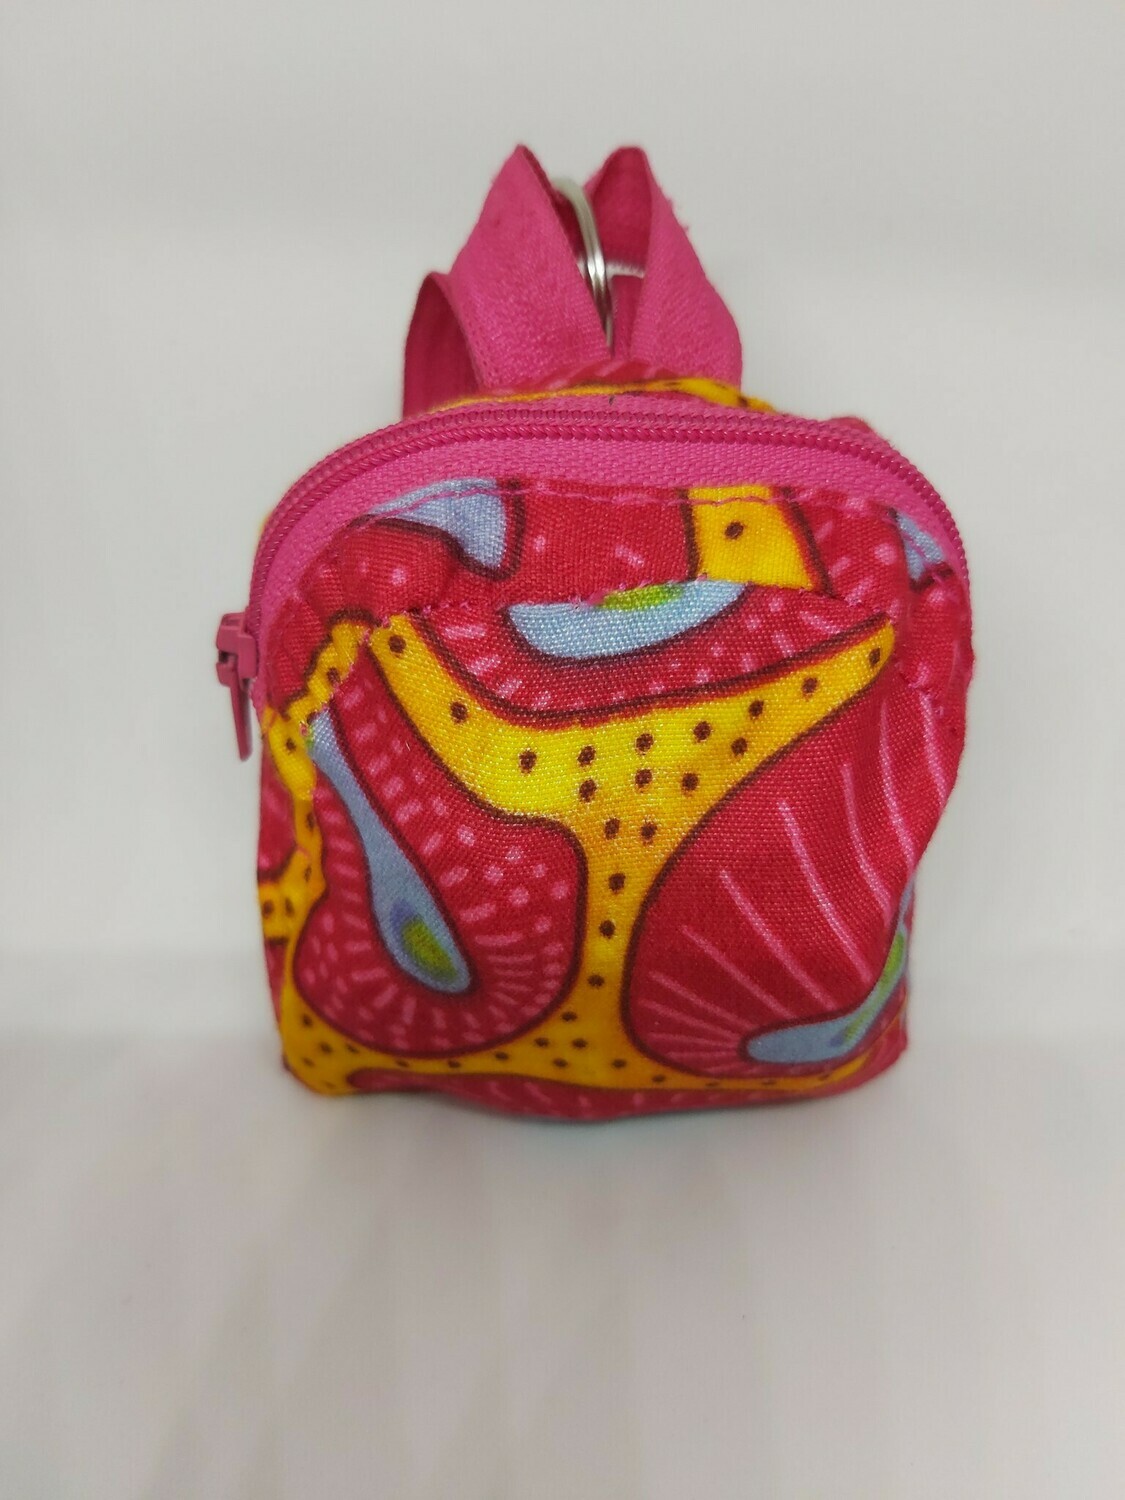 PINK MULTICOLORED BACKPACK KEYCHAIN